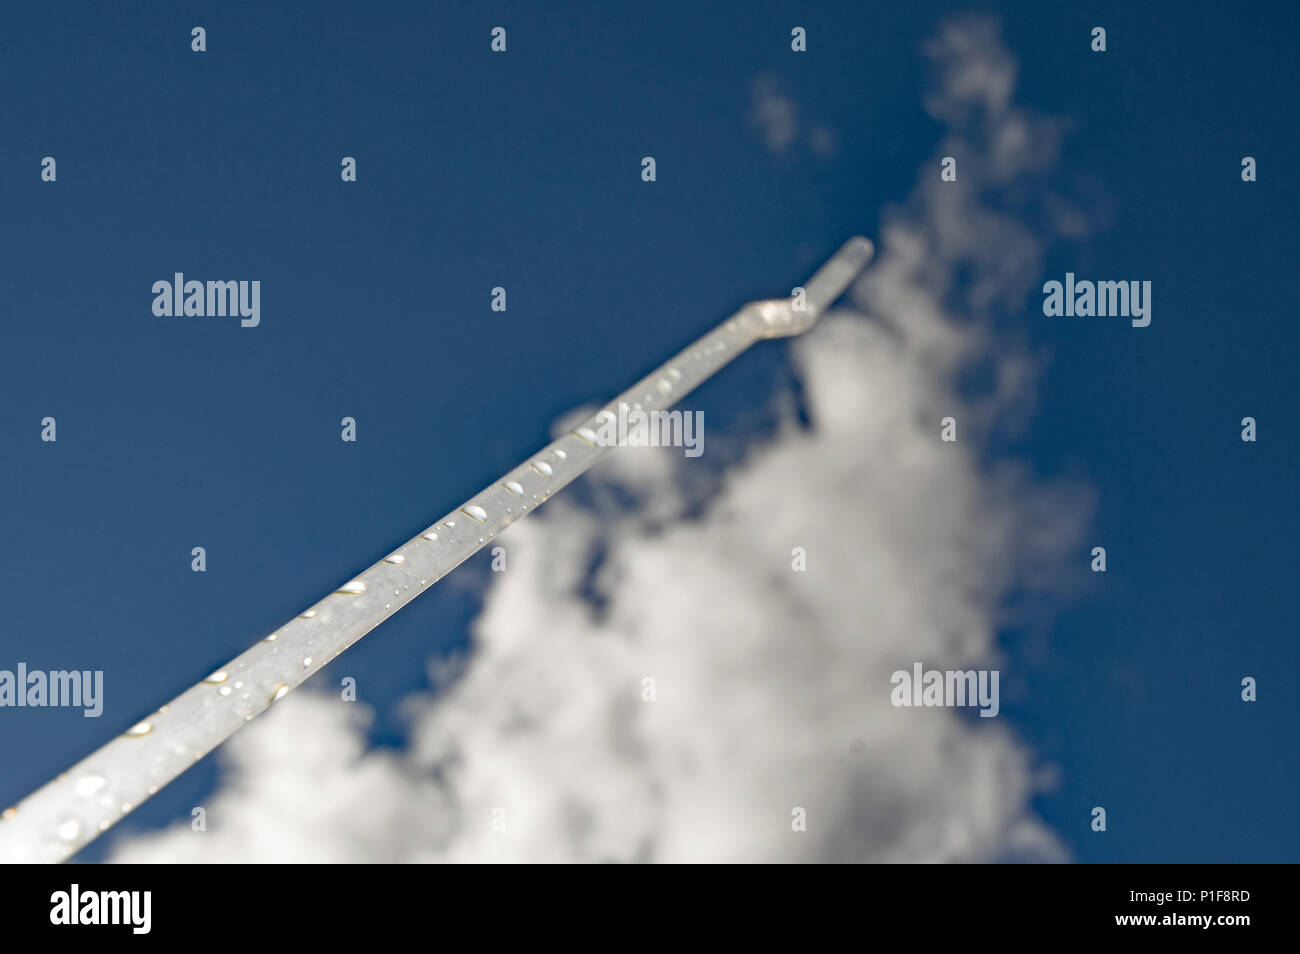 Drinking straw like a trajectory into the cloudy sky. Stock Photo